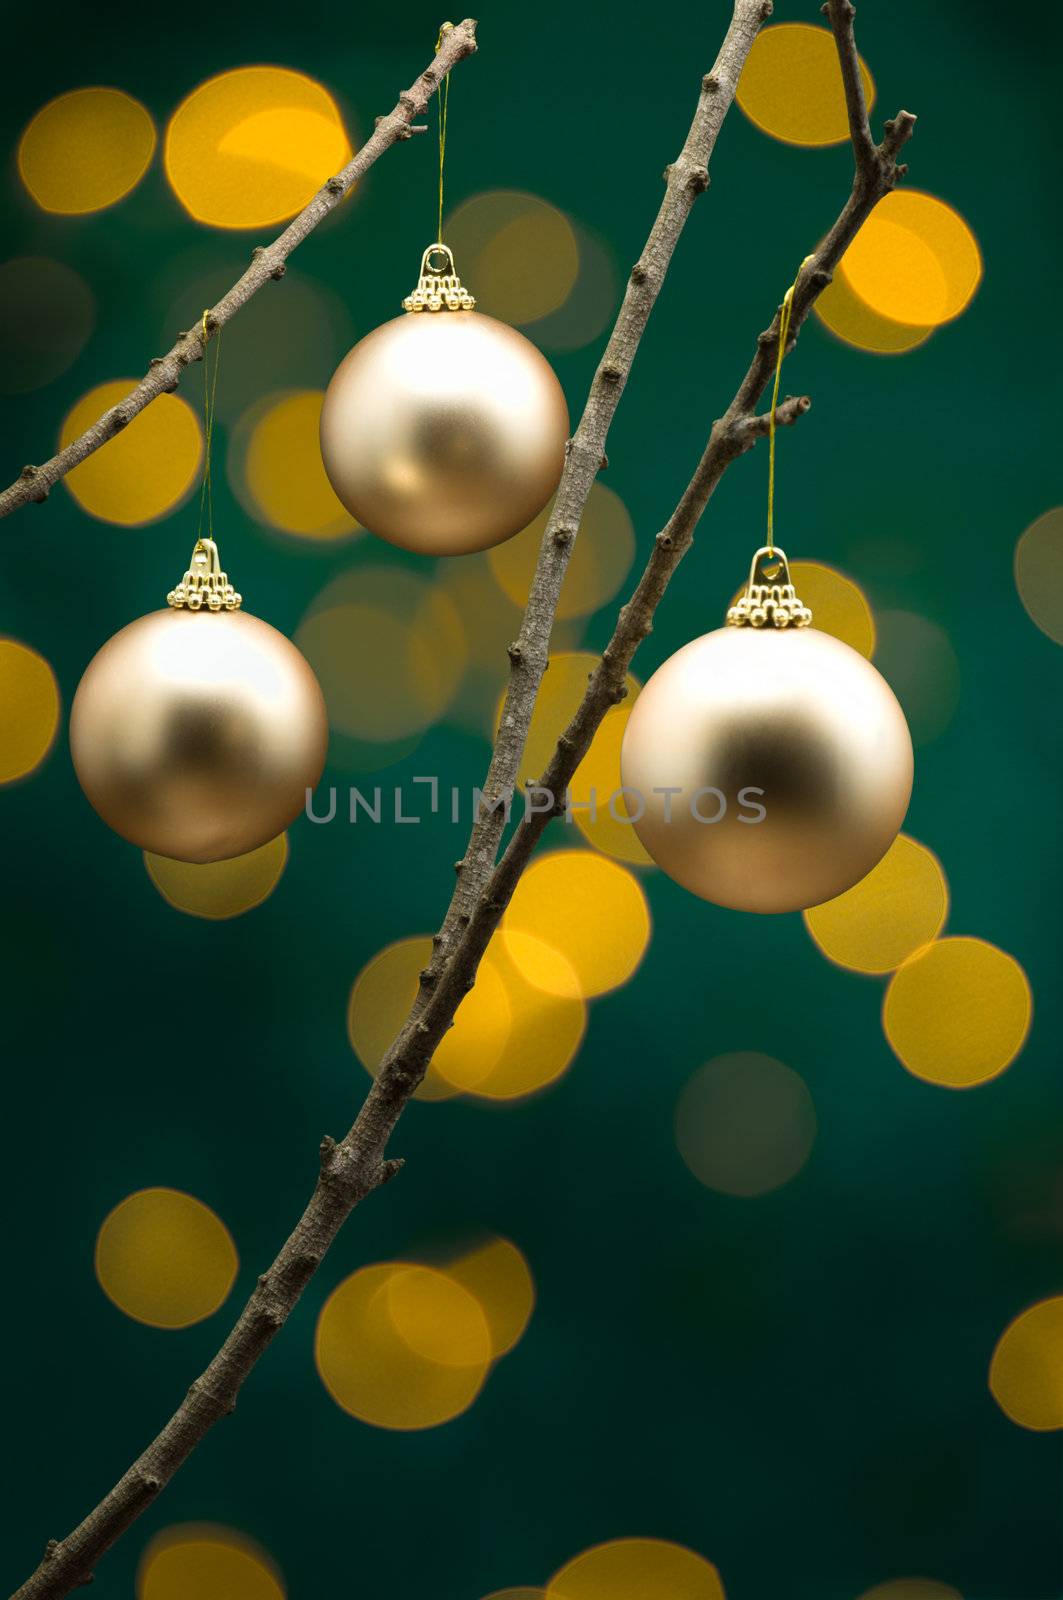 Golden Christmas decoration in front of lights on tree branch